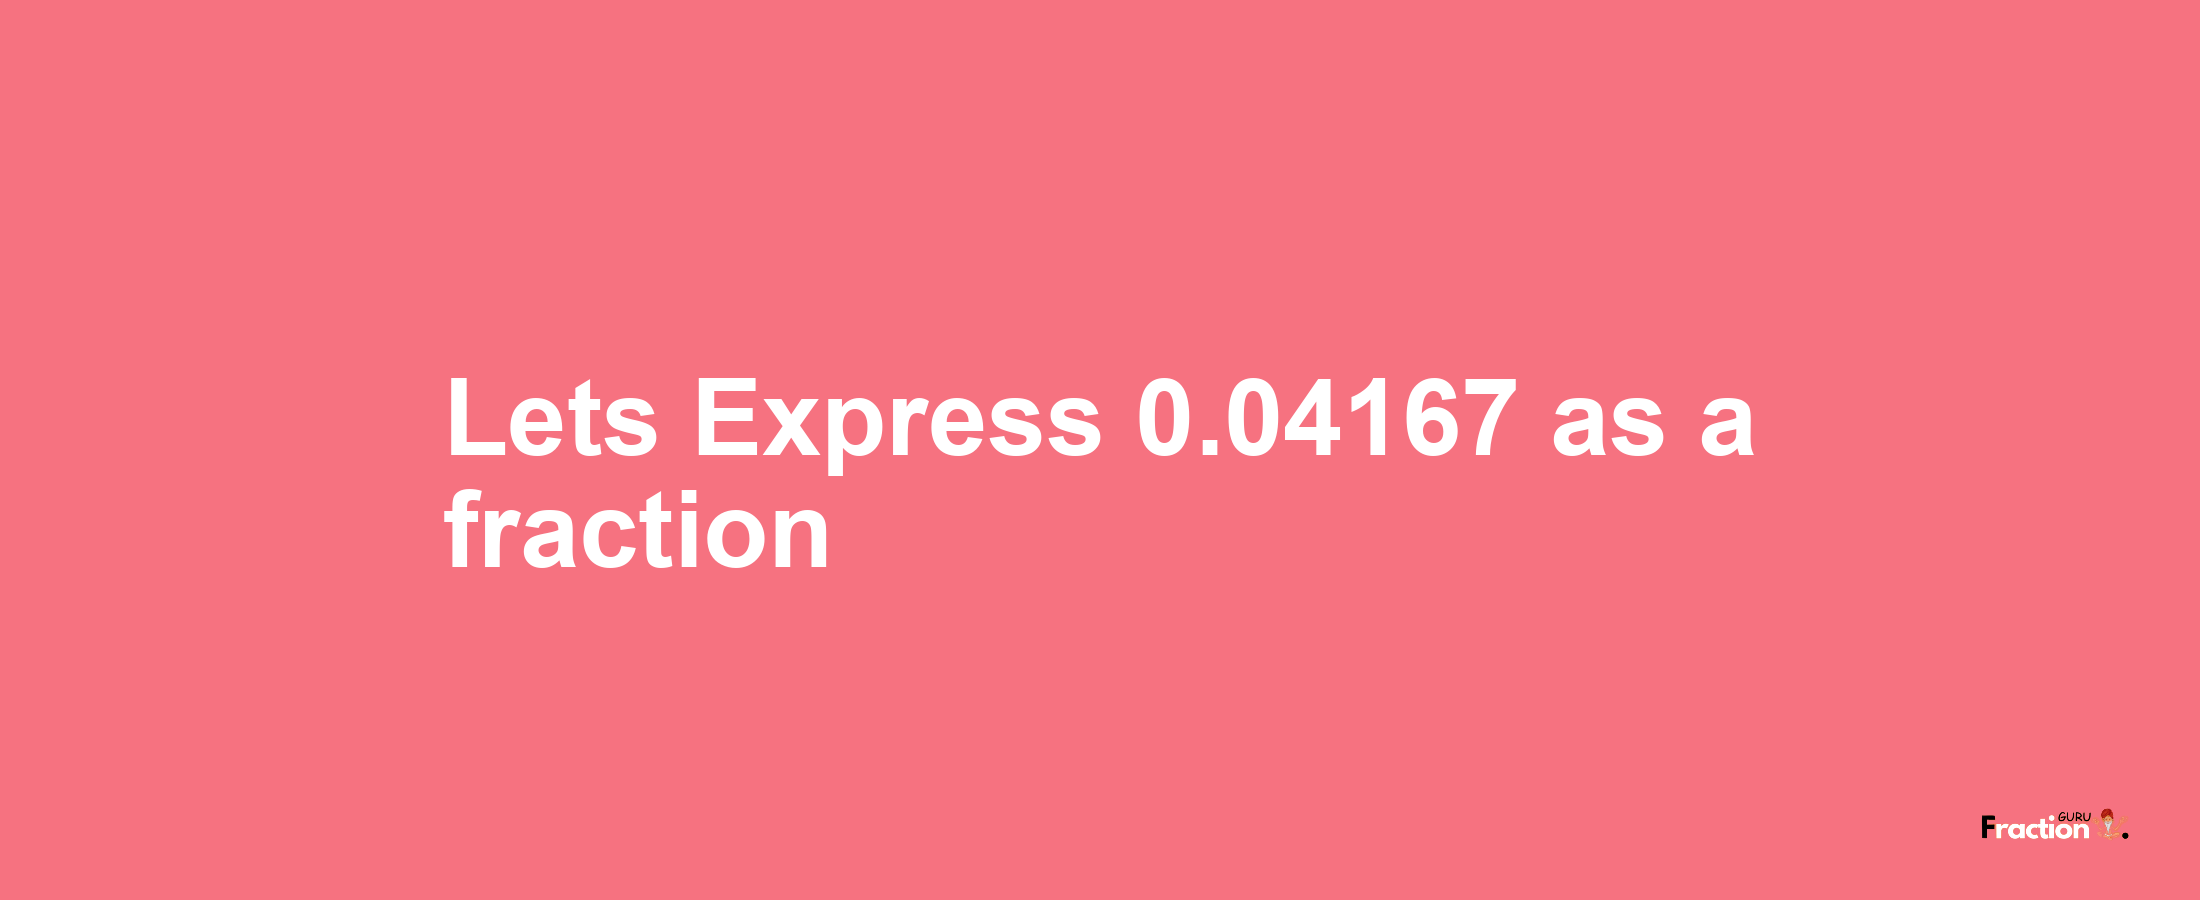 Lets Express 0.04167 as afraction